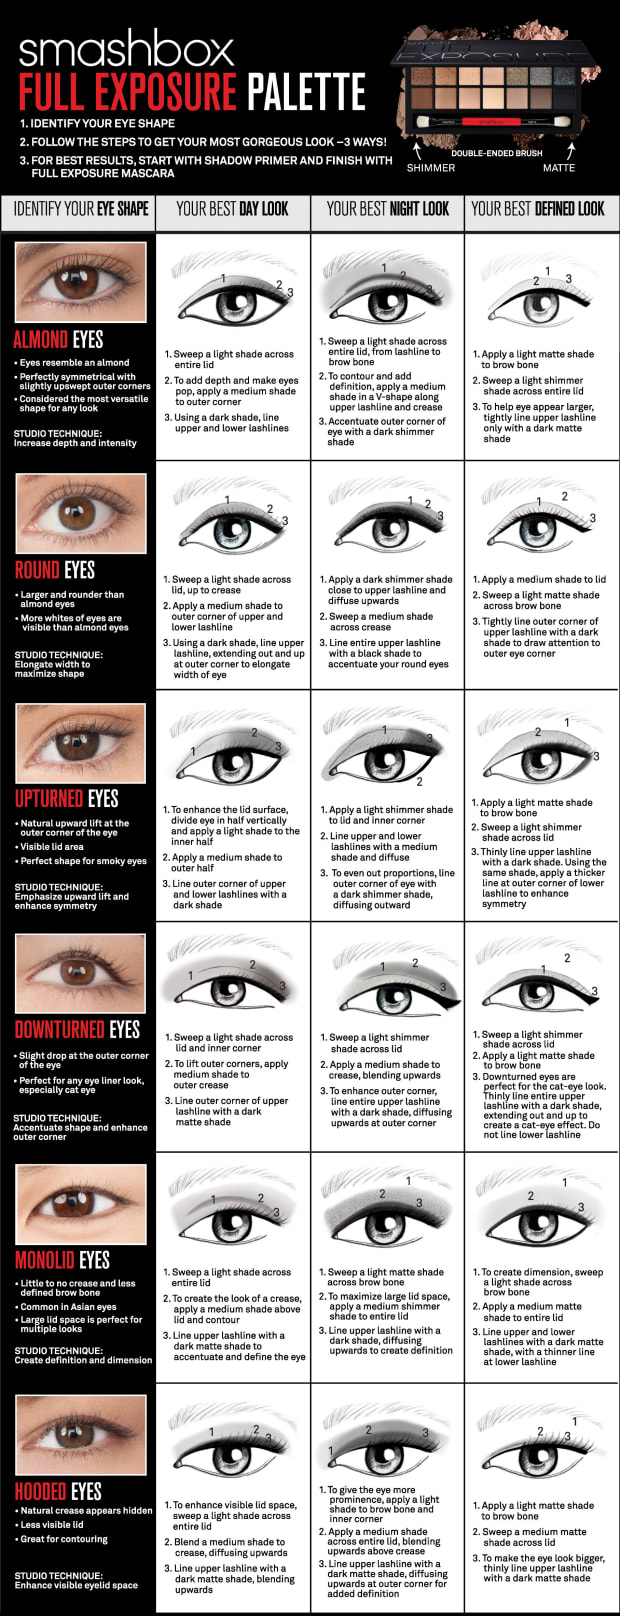 GIRL HOW TO APPLY MAKEUP FOR YOUR EYE SHAPE + HOW TO OUT - Beautygeeks